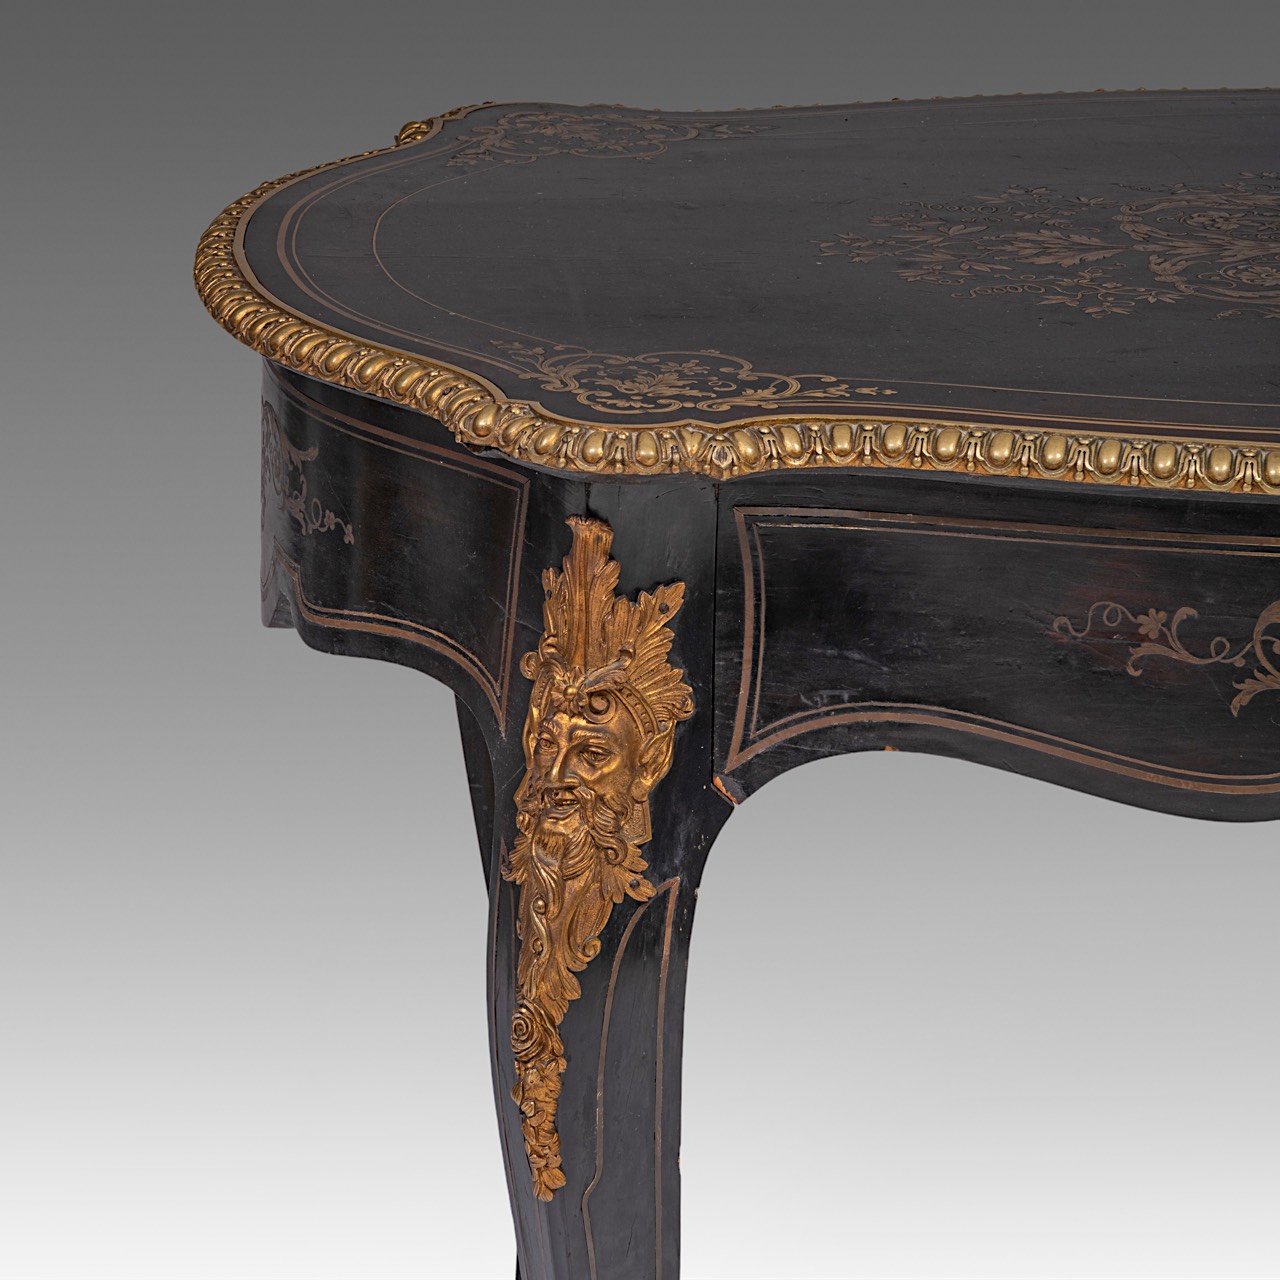 A Napoleon III (1852-1870) Boulle centre table, stamped 'HPR' Henri Picard (1840-1890), H 75 - W 120 - Image 8 of 10